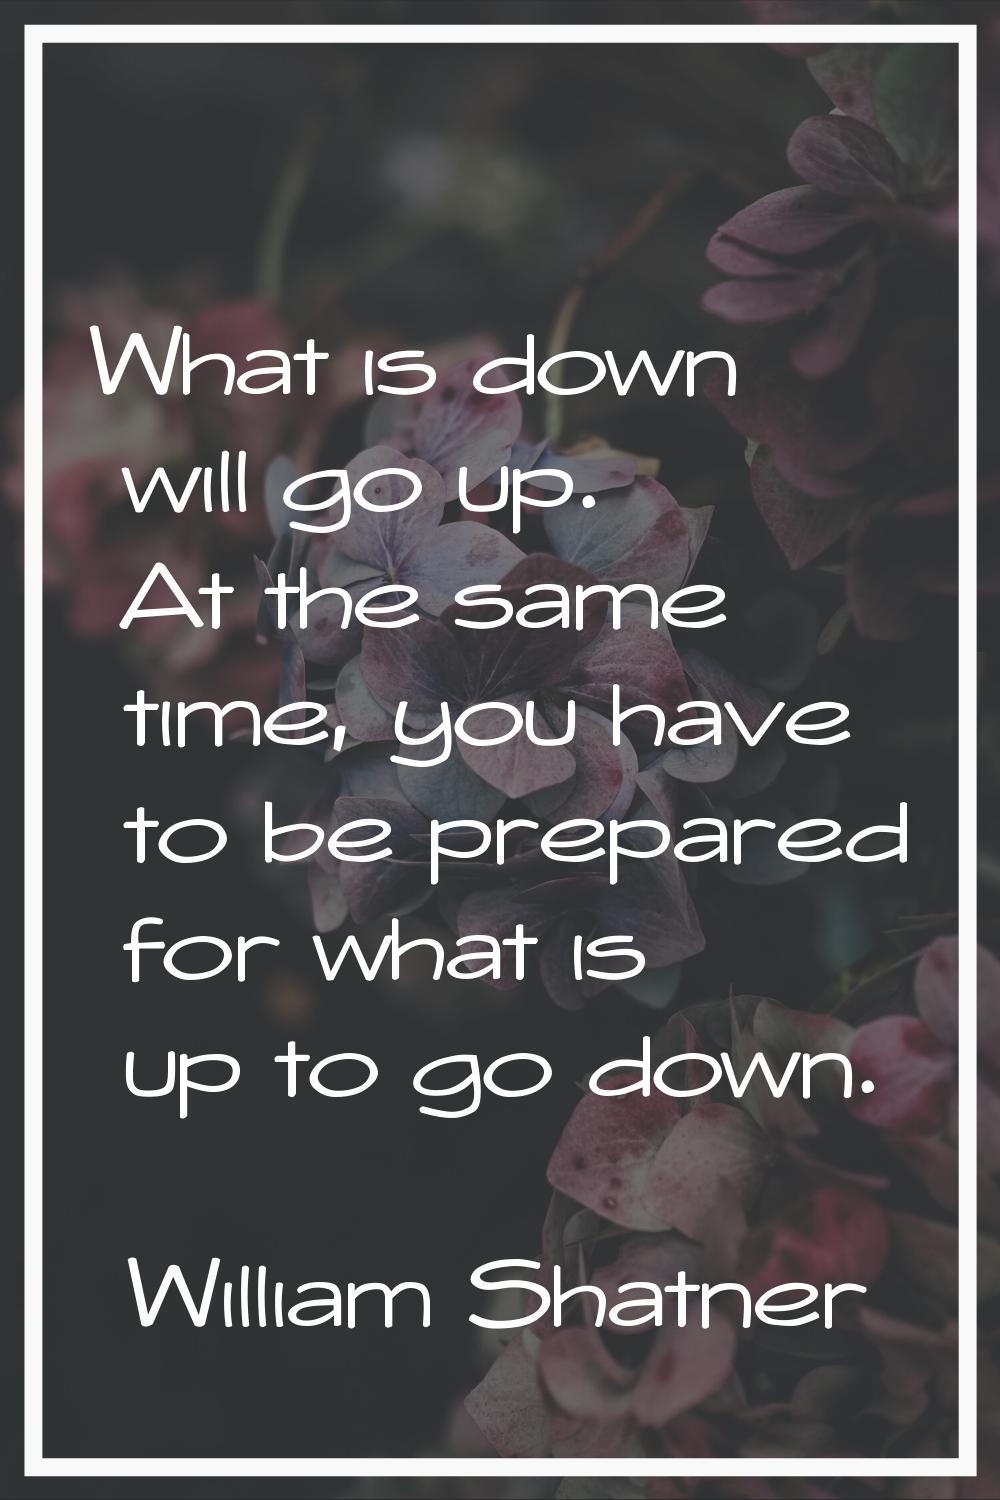 What is down will go up. At the same time, you have to be prepared for what is up to go down.